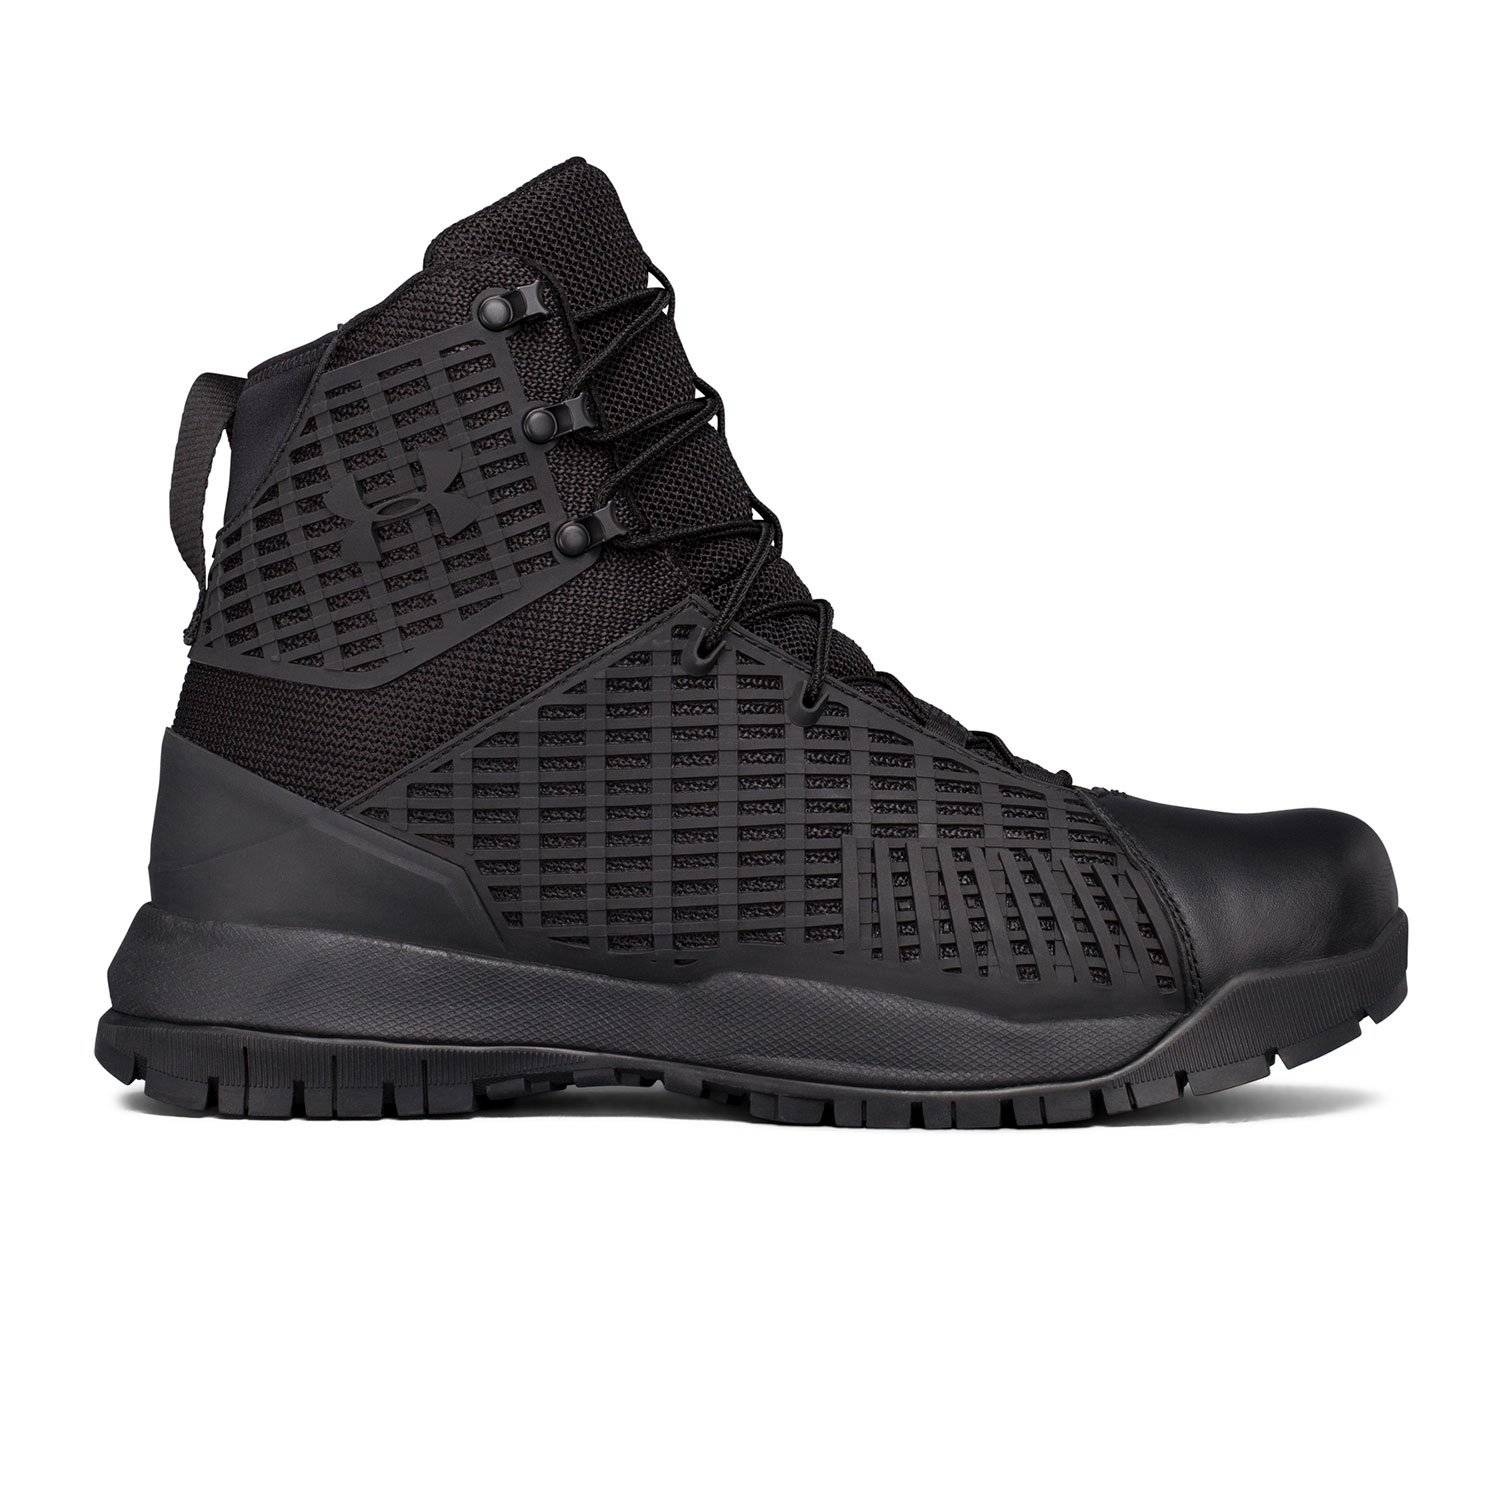 Under Armour Stryker Tactical Boots